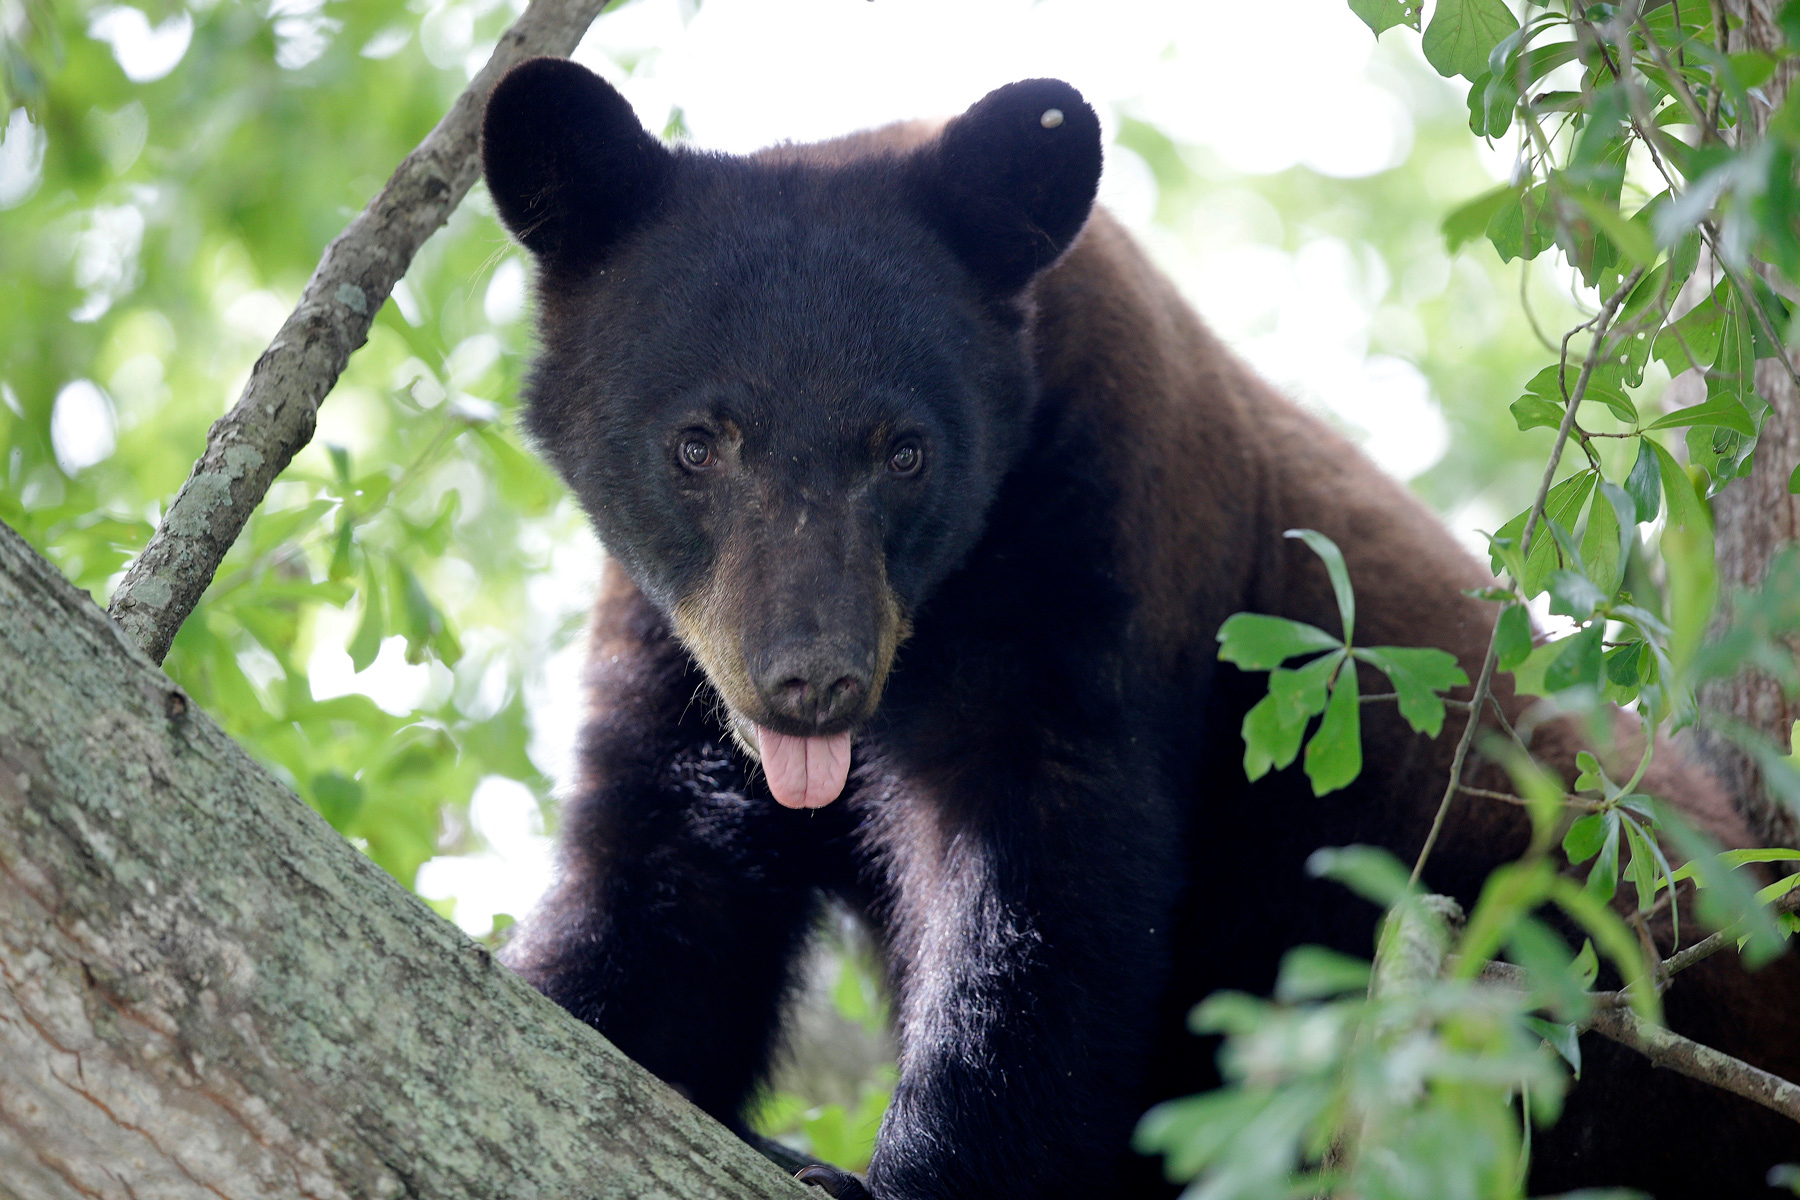 Could black bears make a comeback in their native Texas habitat? Here’s what we know.